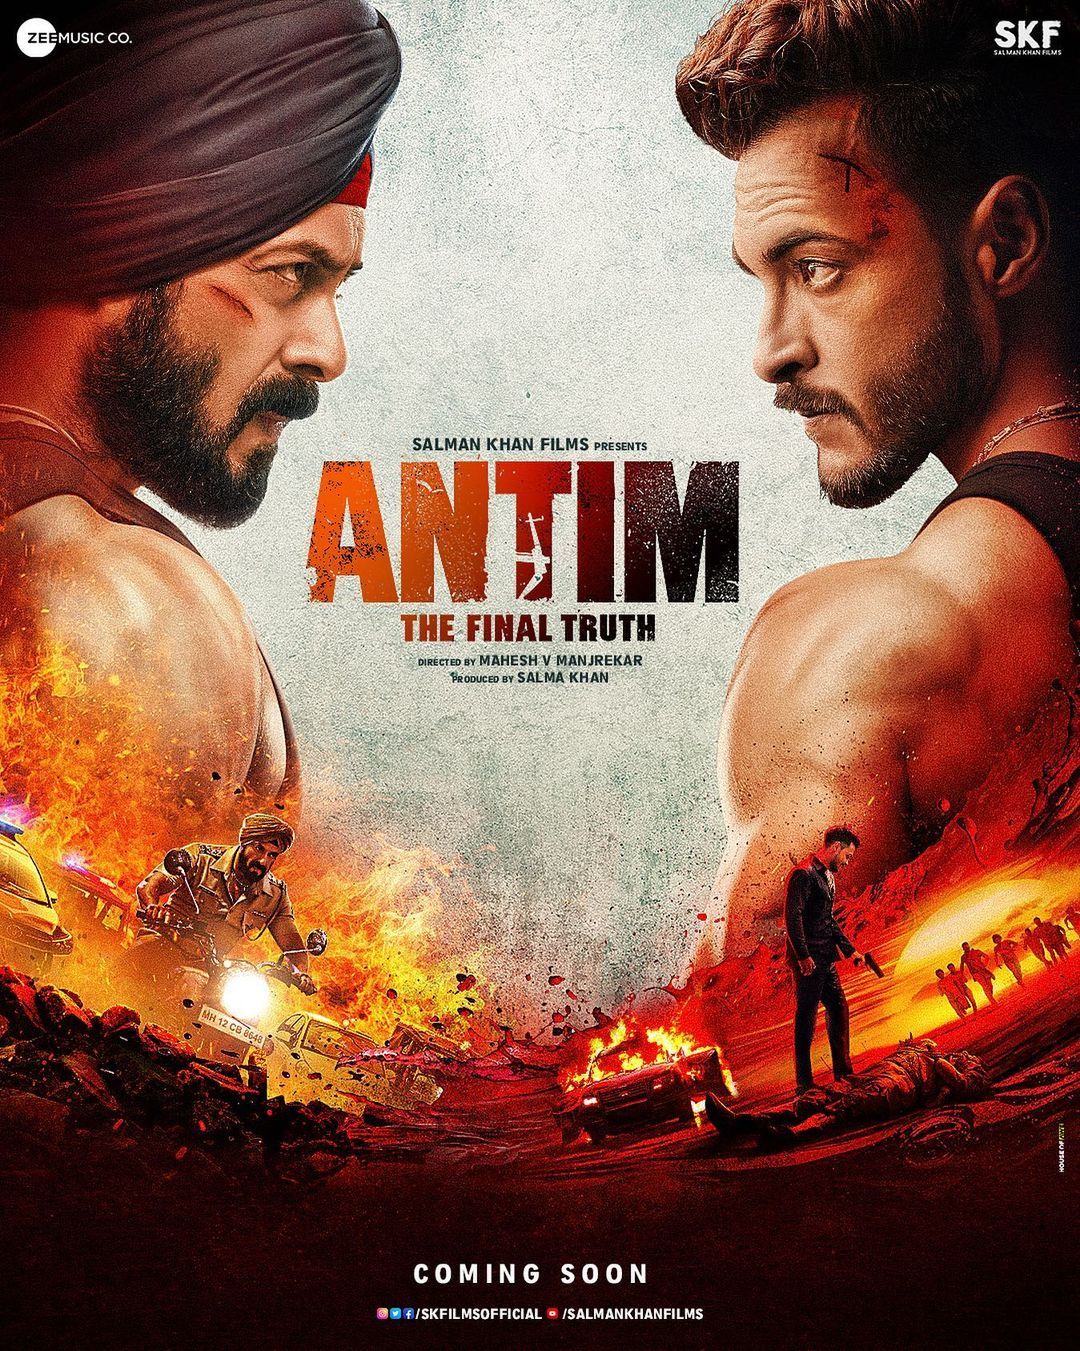 Salman Khan unveils the fierce new poster of Antim: The Final Truth featuring him and Aayush Sharma